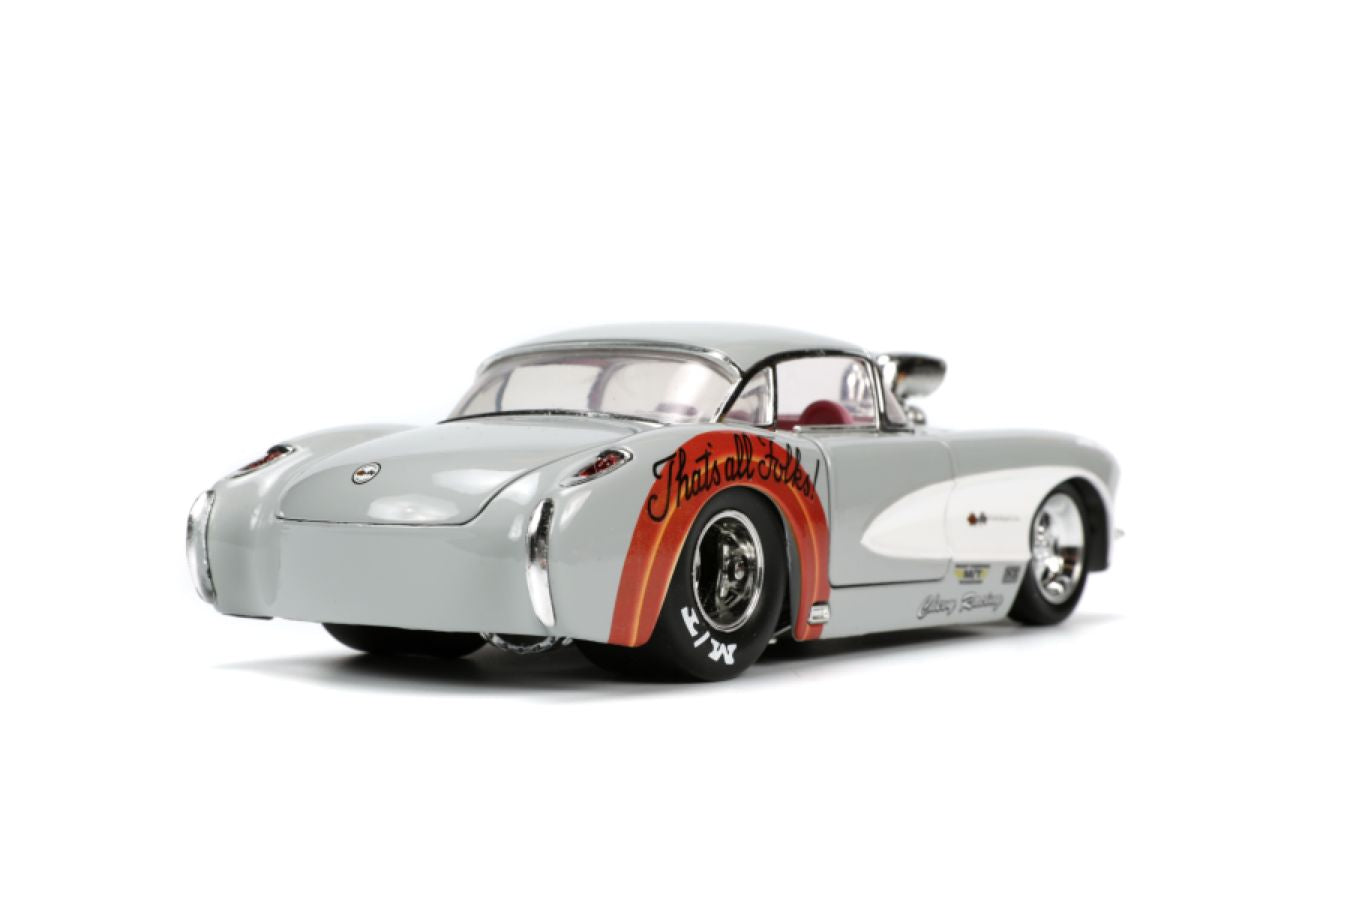 Looney Tunes - 57 Chevrolet Corvette with Bugs Bunny 1:24 Scale